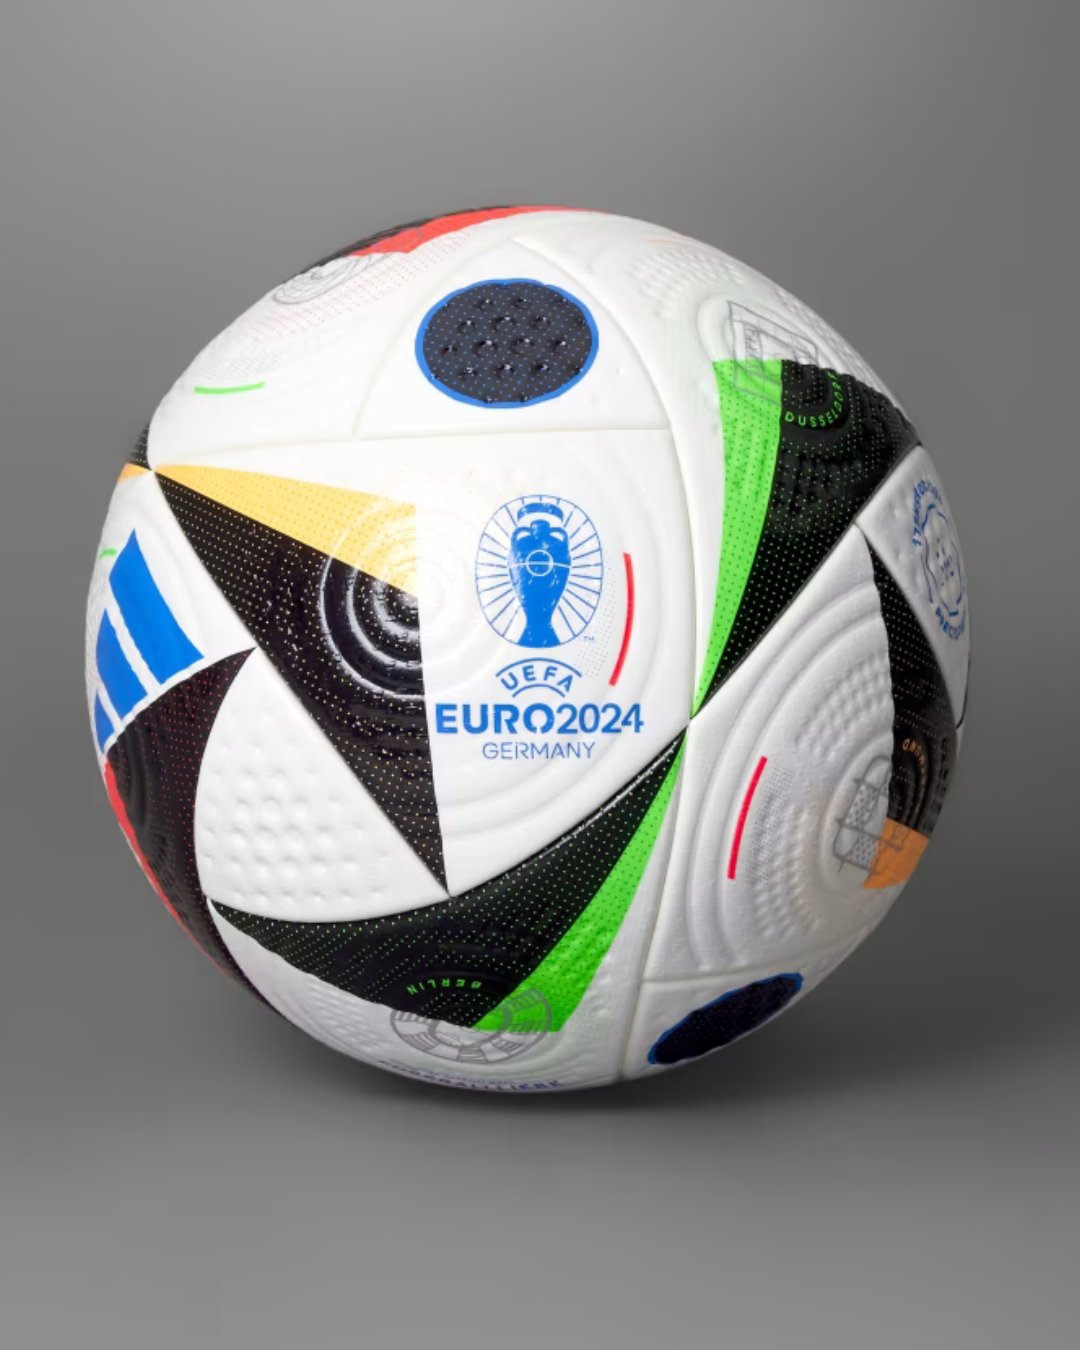 The new adidas ball for EURO 2024 Waiting the opening match on June 14th 